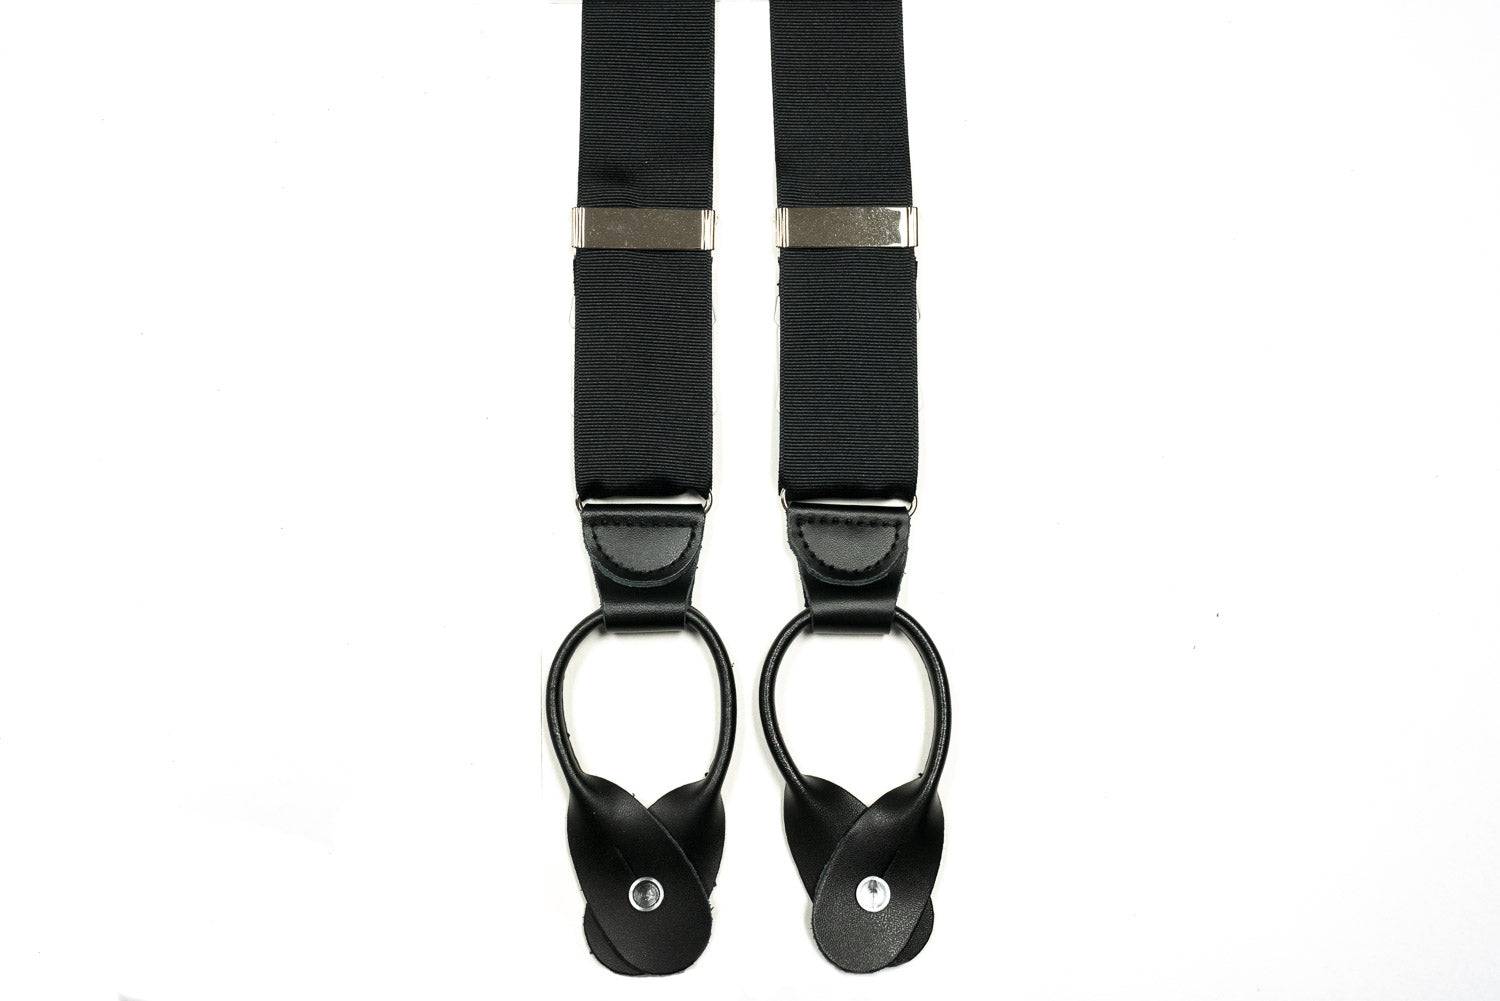 Suspenders With Grosgrain Fabric And Button In Leather Tab Braces In Black - Rainwater's Men's Clothing and Tuxedo Rental